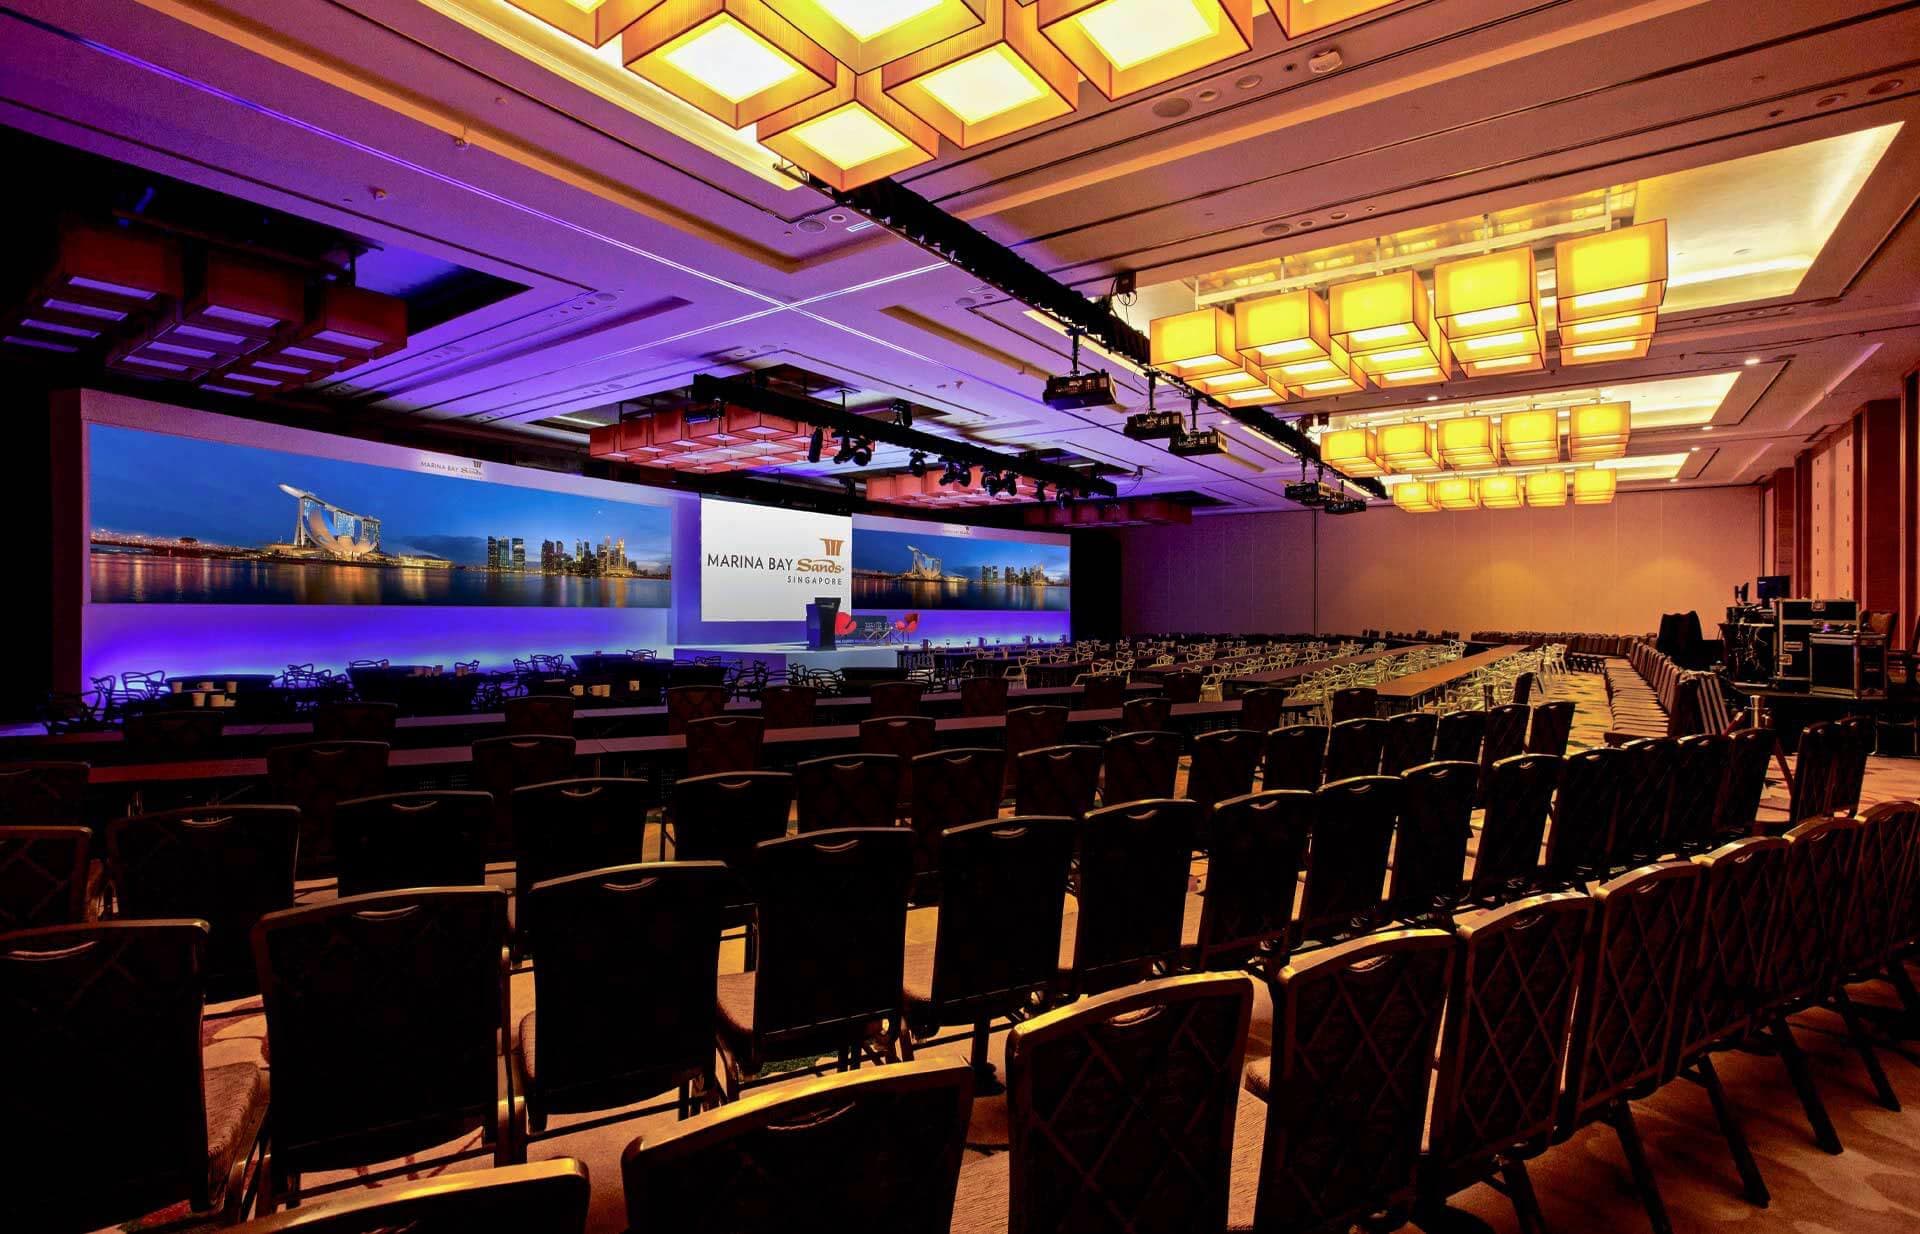 Meetings & Conventions Singapore Events & Exhibitions Marina Bay Sands